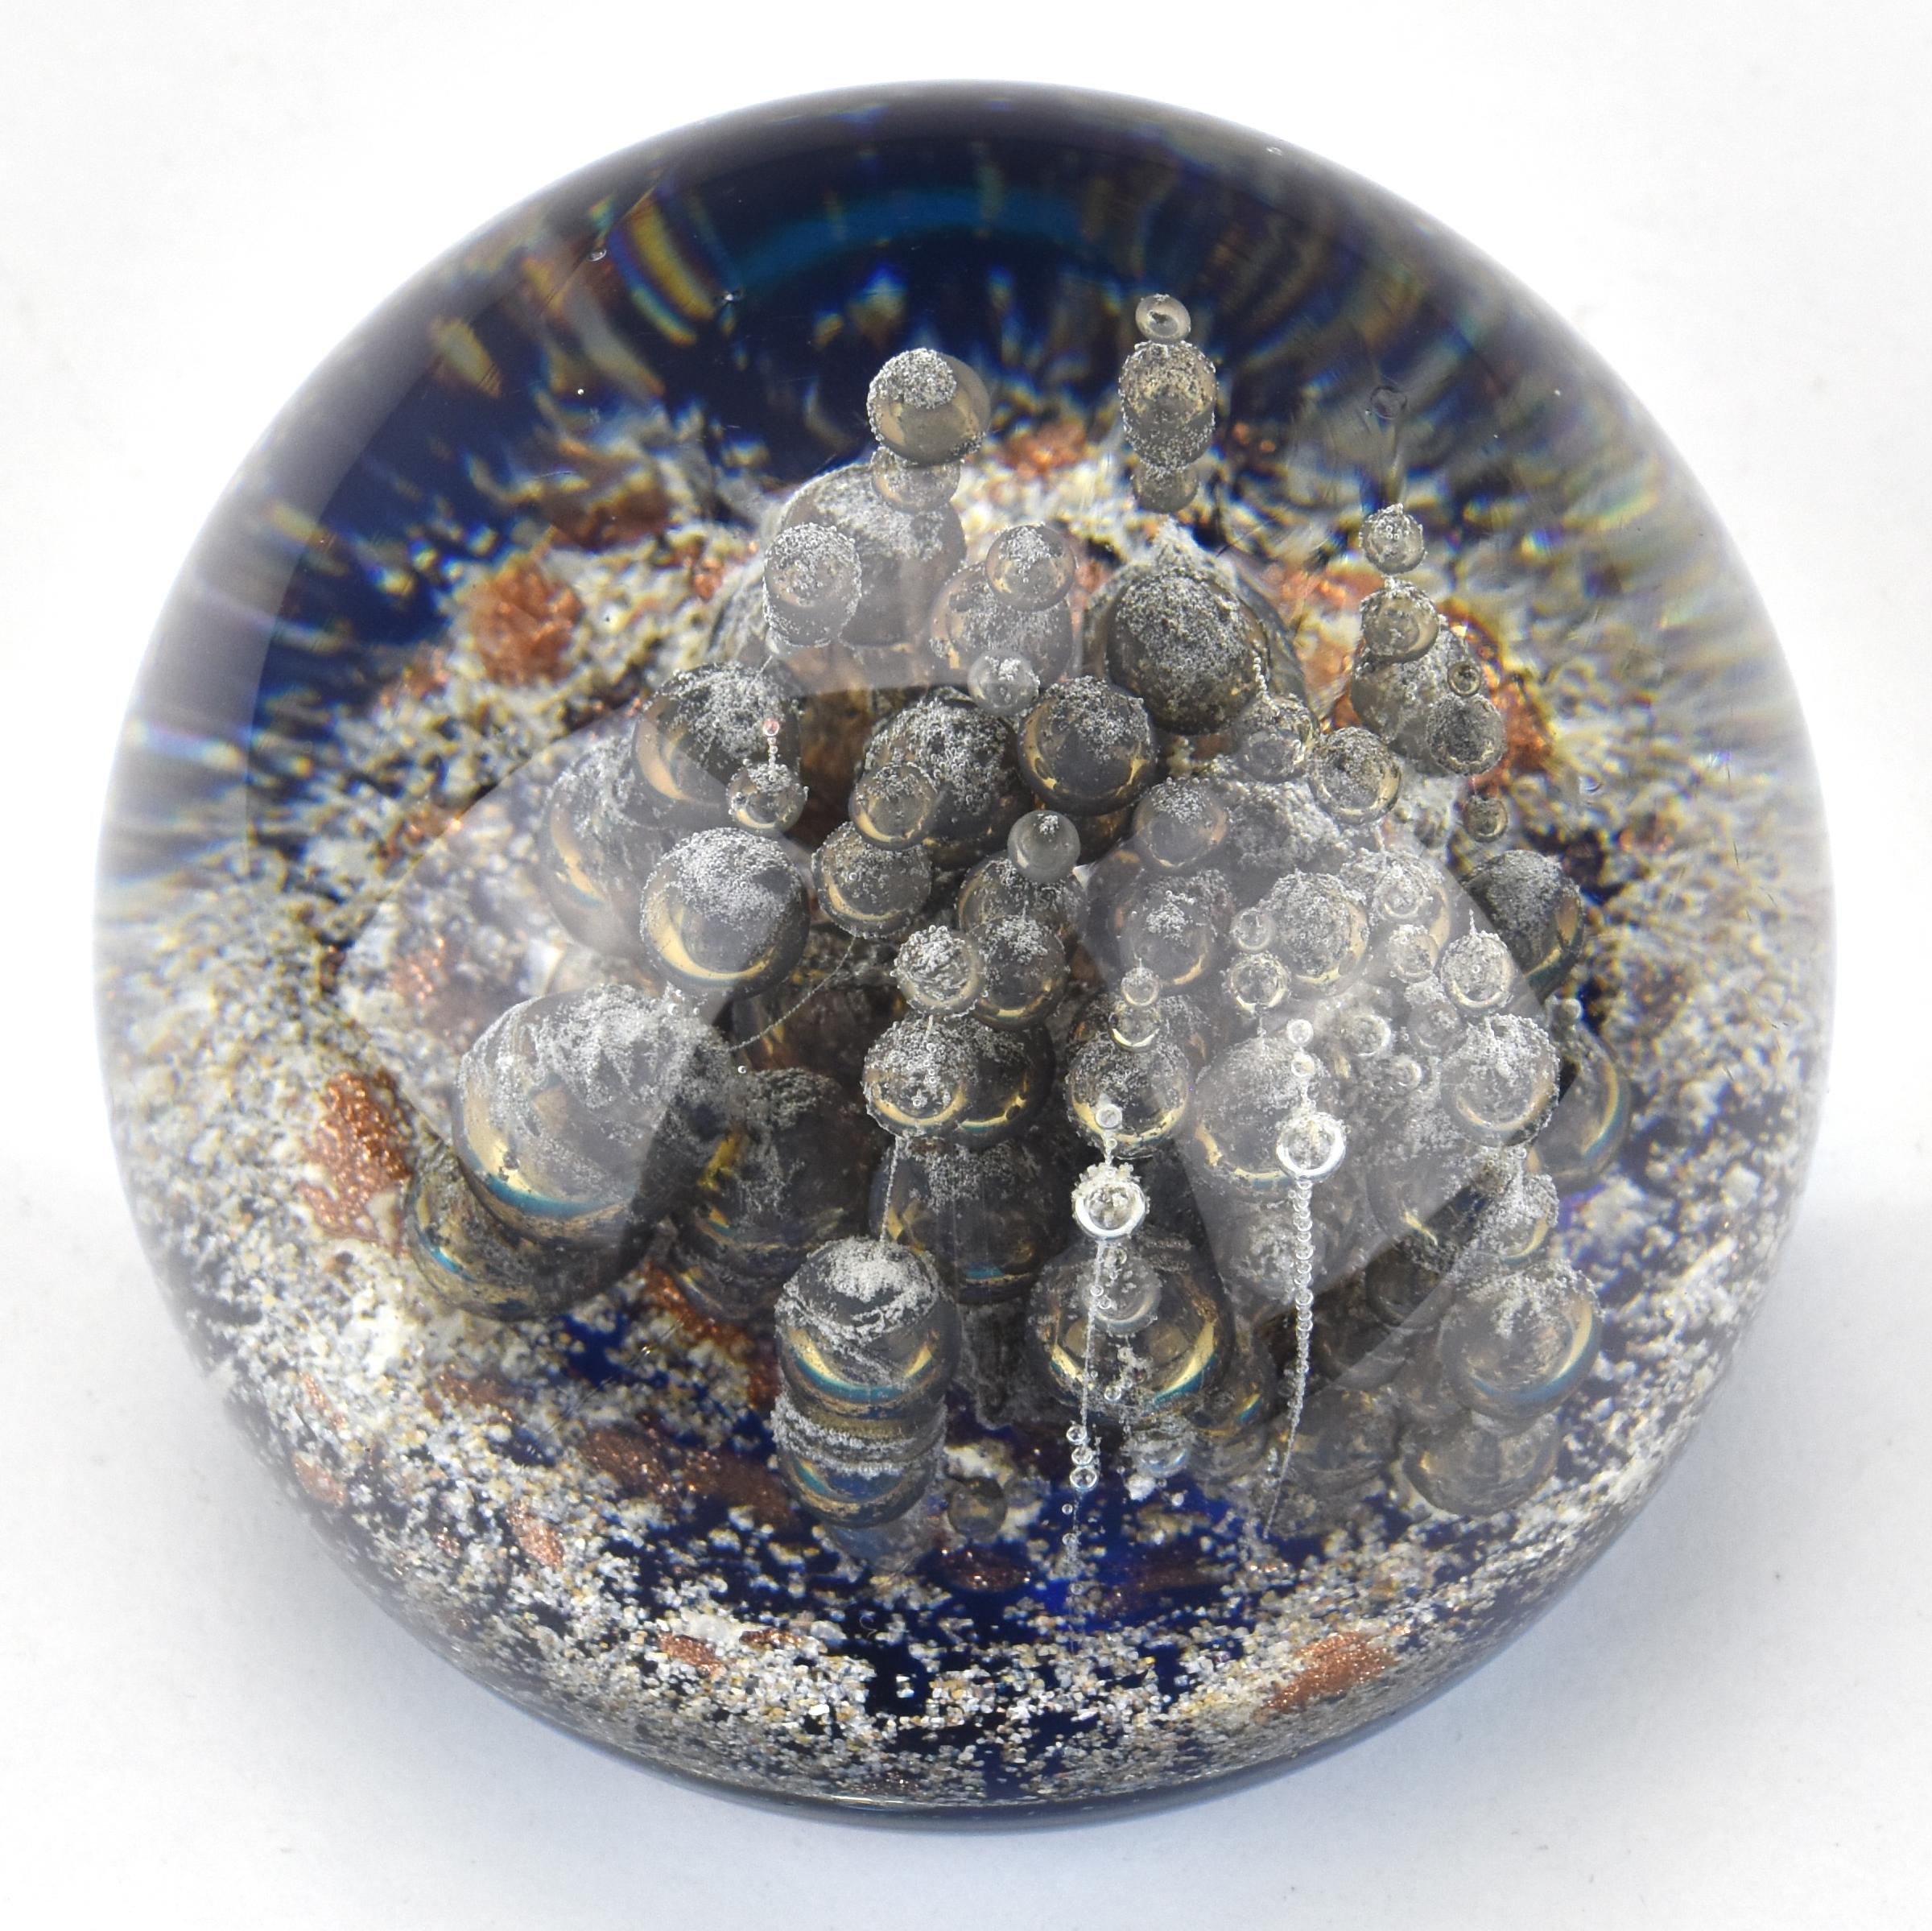 A stunning mid century modern art glass paperweight or object with rising vulcano style bubbles with included metal dust over a blue ground bearing a genuine Murano paper label. 